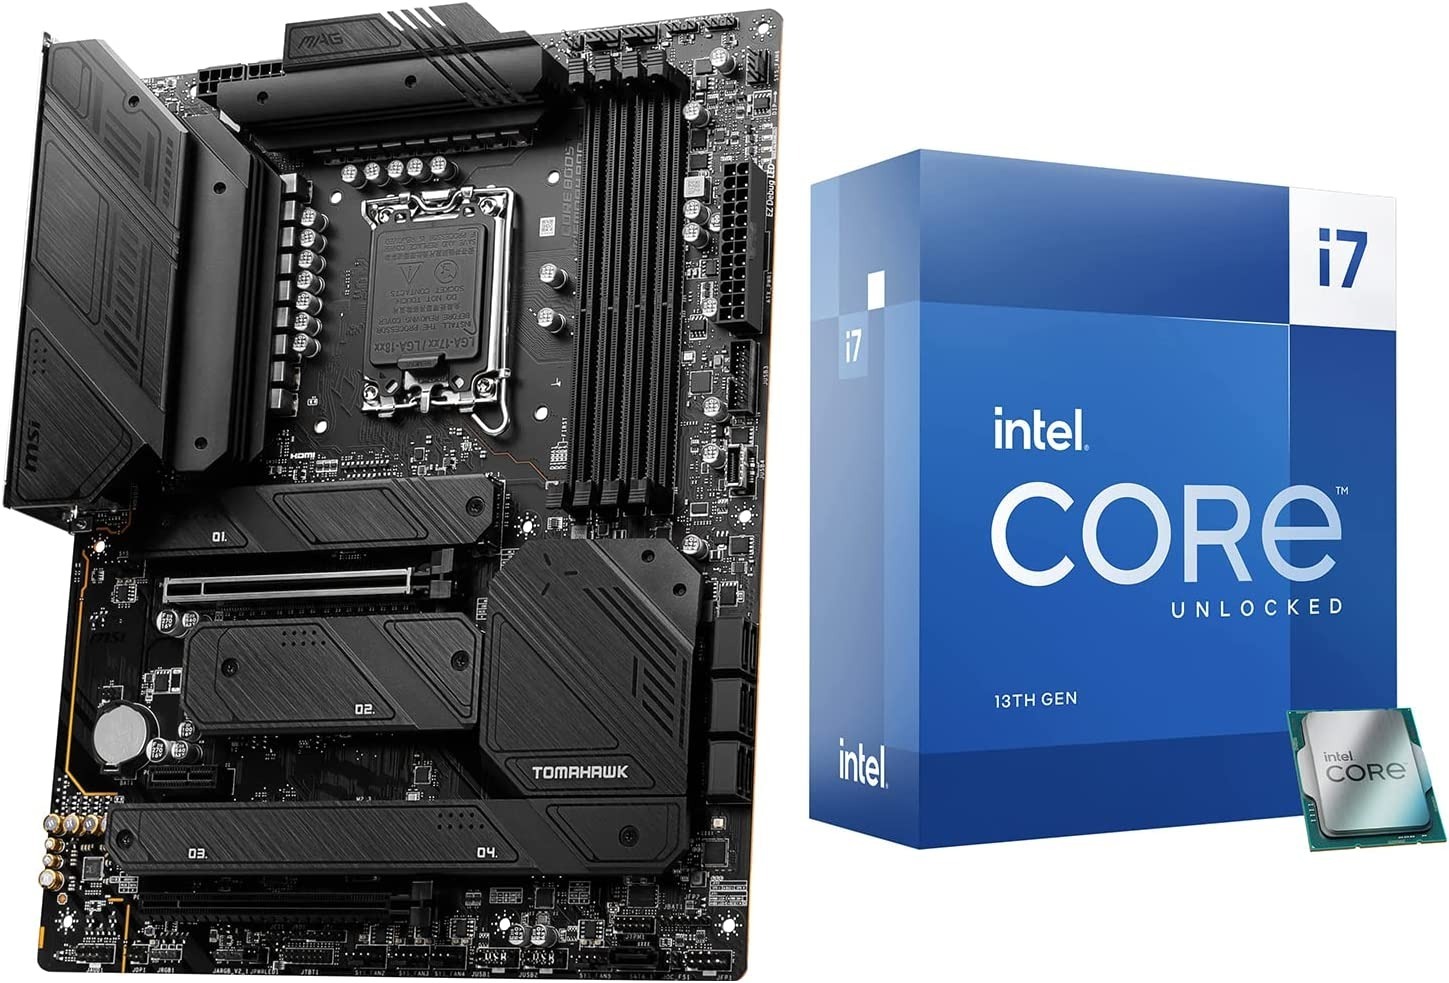 Intel Core i7-13700K 13th Gen CPU + MSI MAG Z790 Tomahawk WiFi DDR4 Motherboard Bundle $649 and more + Free Shipping